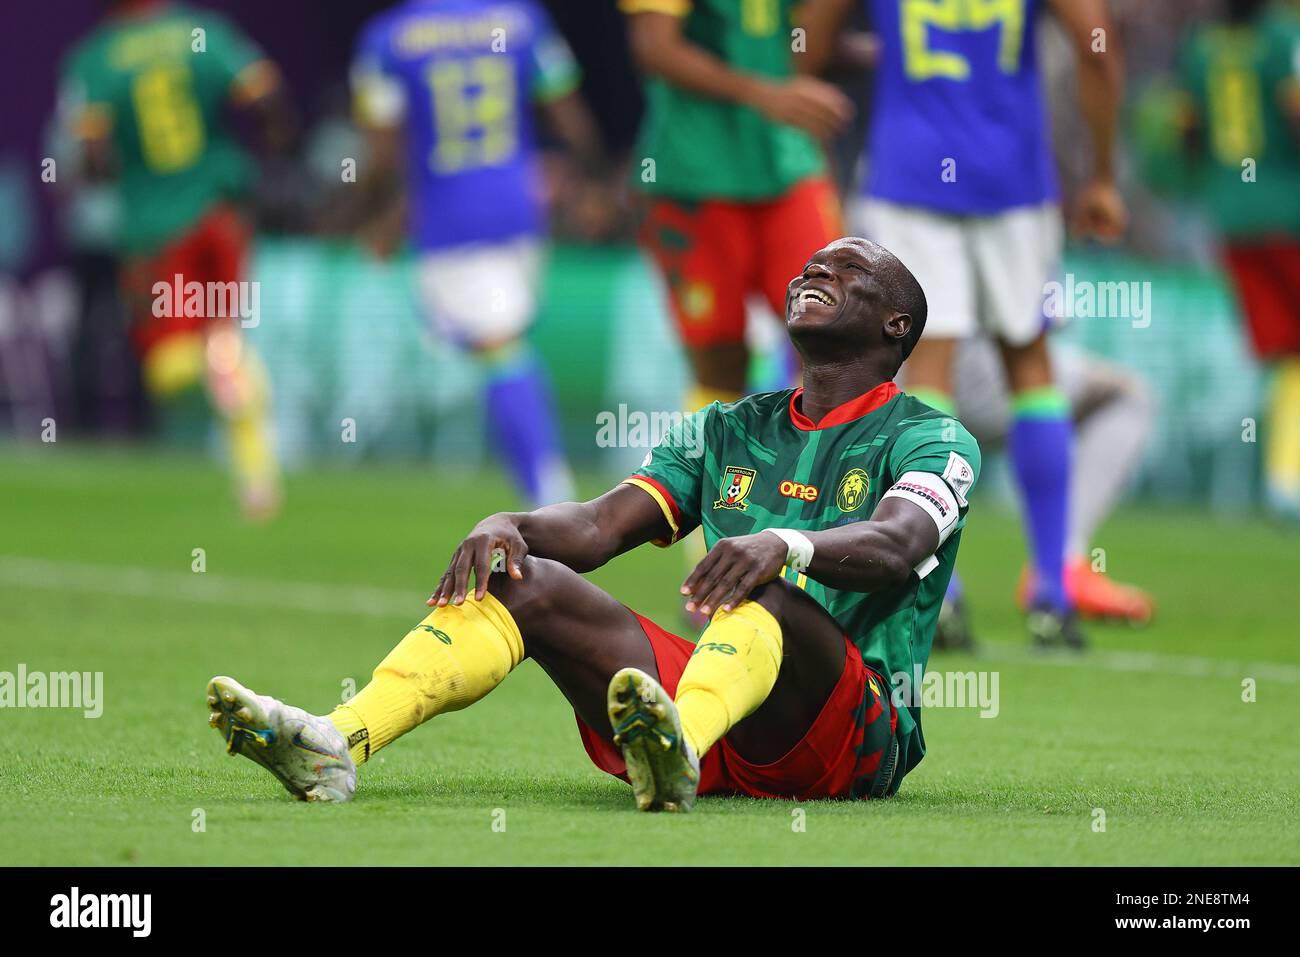 LUSAIL CITY, QATAR - DECEMBER 02: Vincent Aboubakar  during the FIFA World Cup Qatar 2022 Group G match between Cameroon and Brazil at Lusail Stadium on December 02, 2022 in Lusail City, Qatar. (Photo by MB Media) Stock Photo